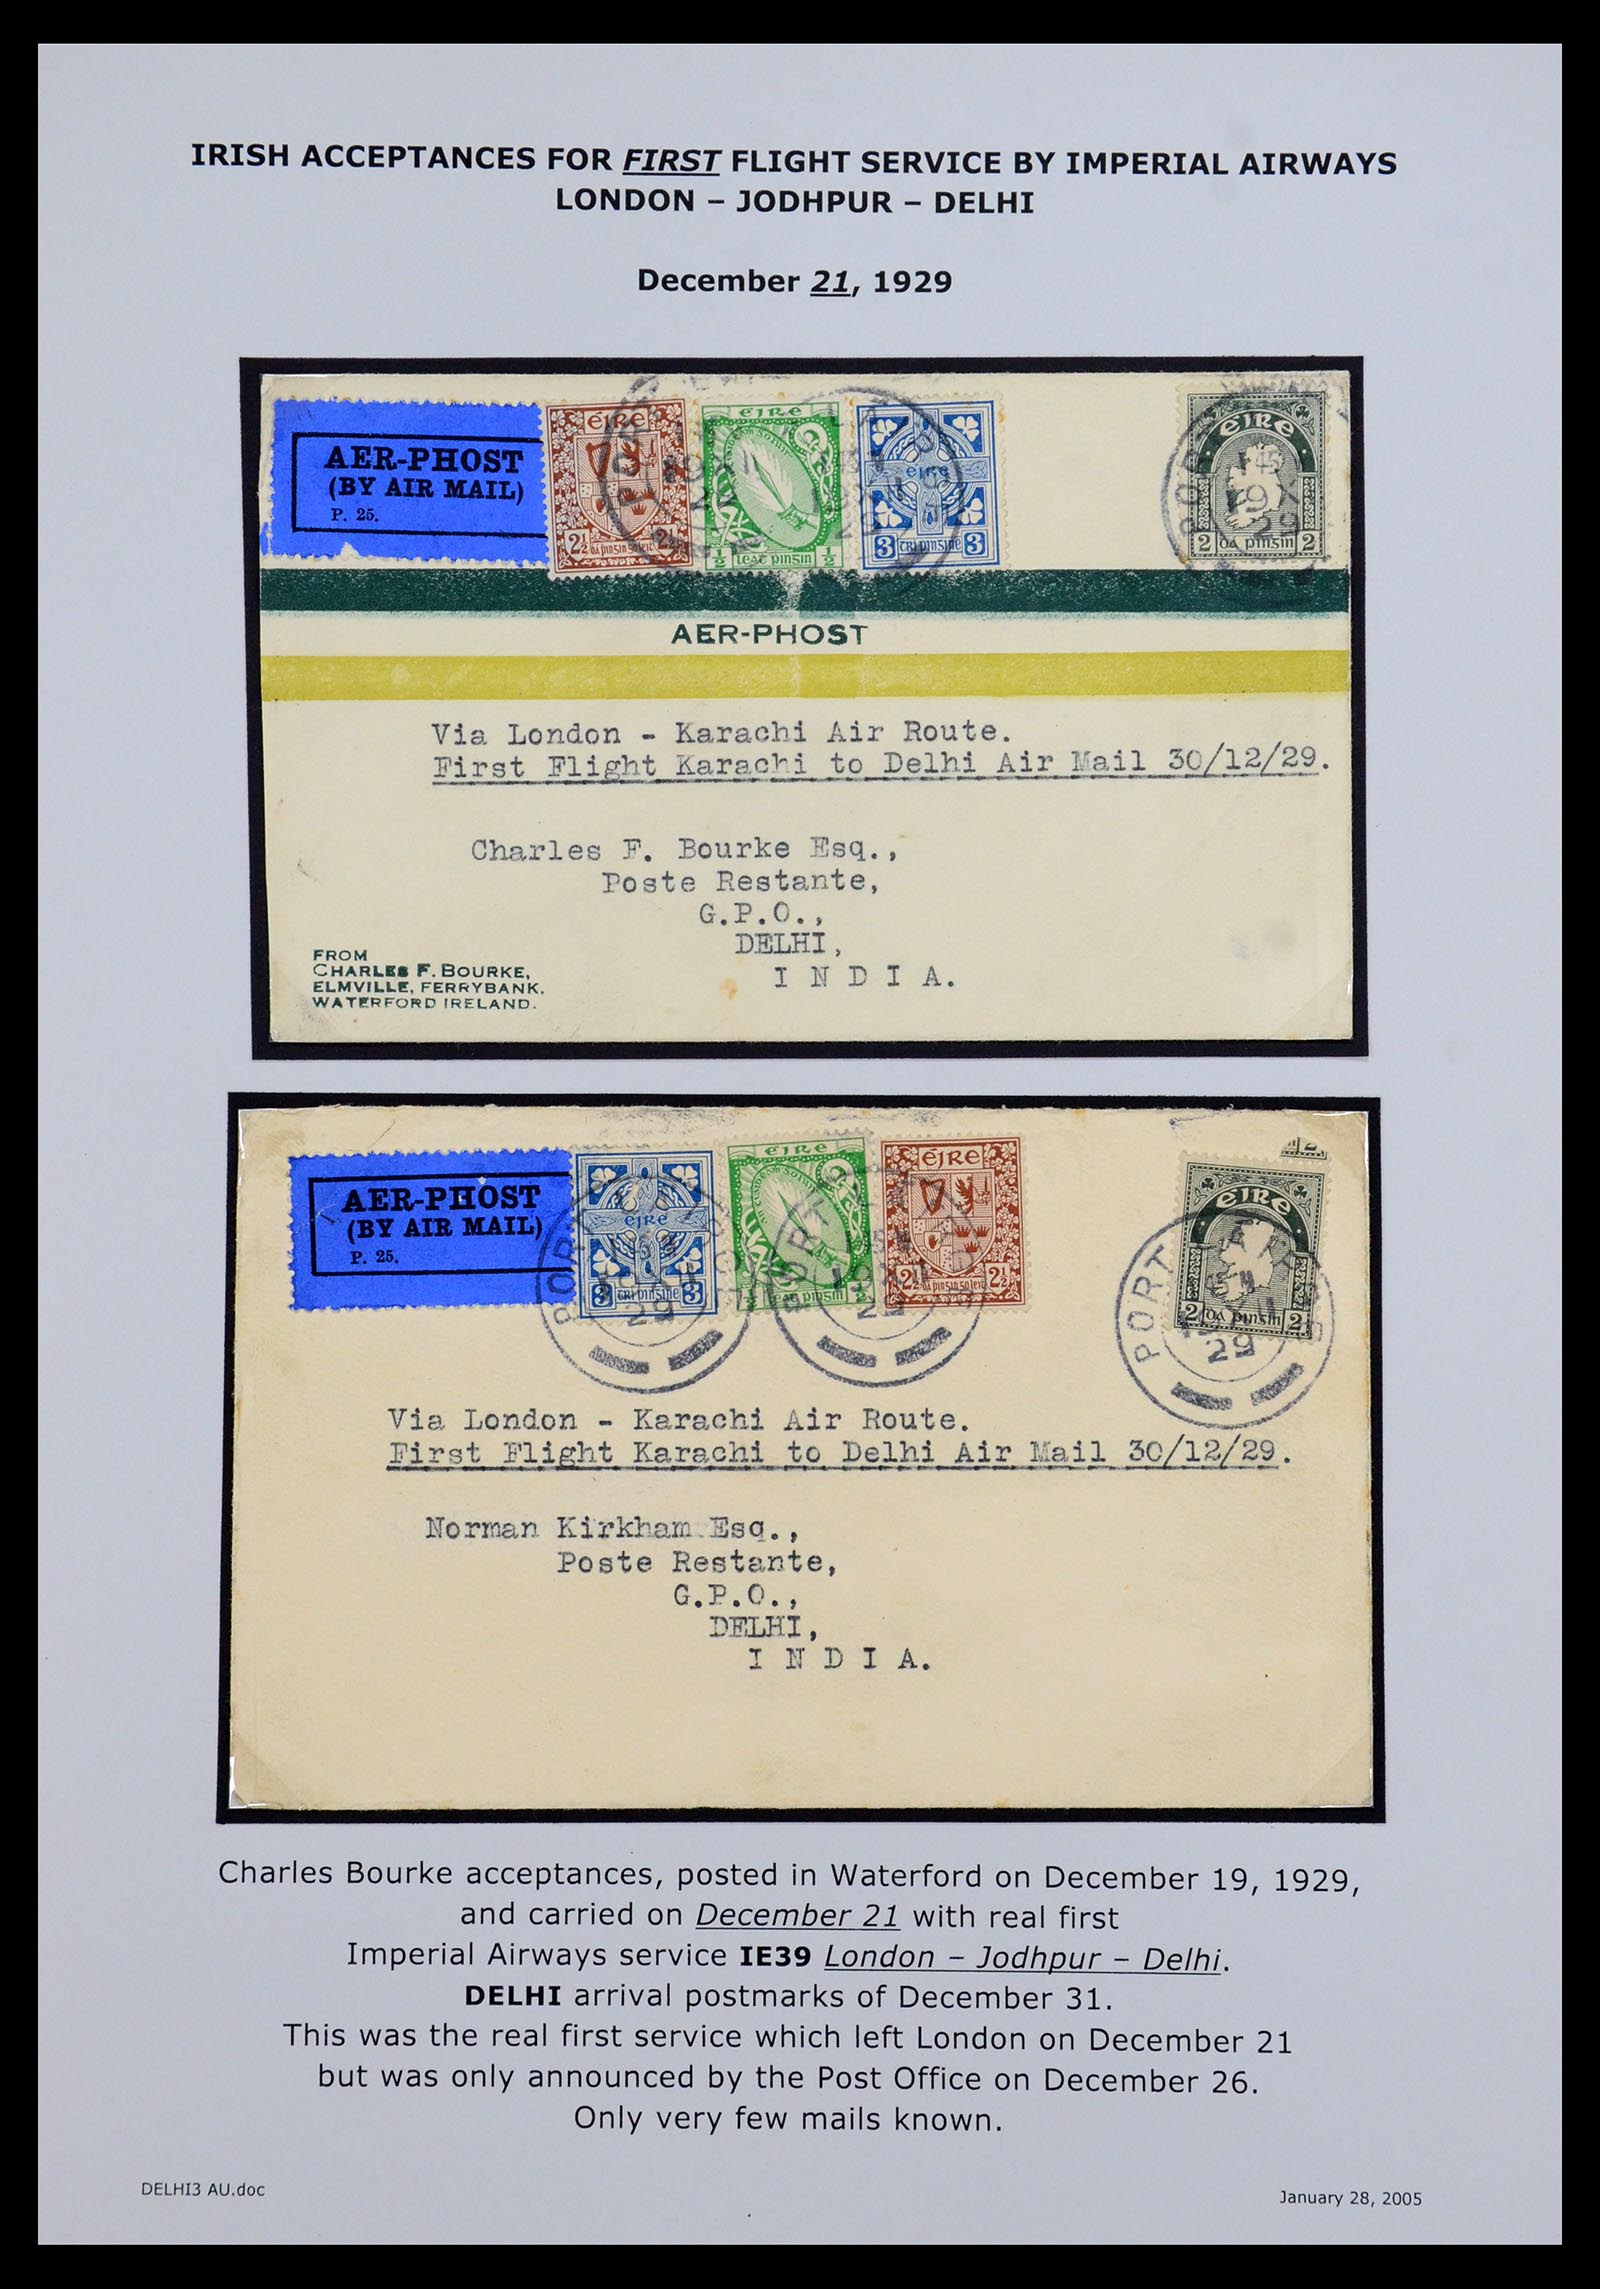 35994 007 - Stamp collection 35994 Ireland airmail covers 1929-1932.